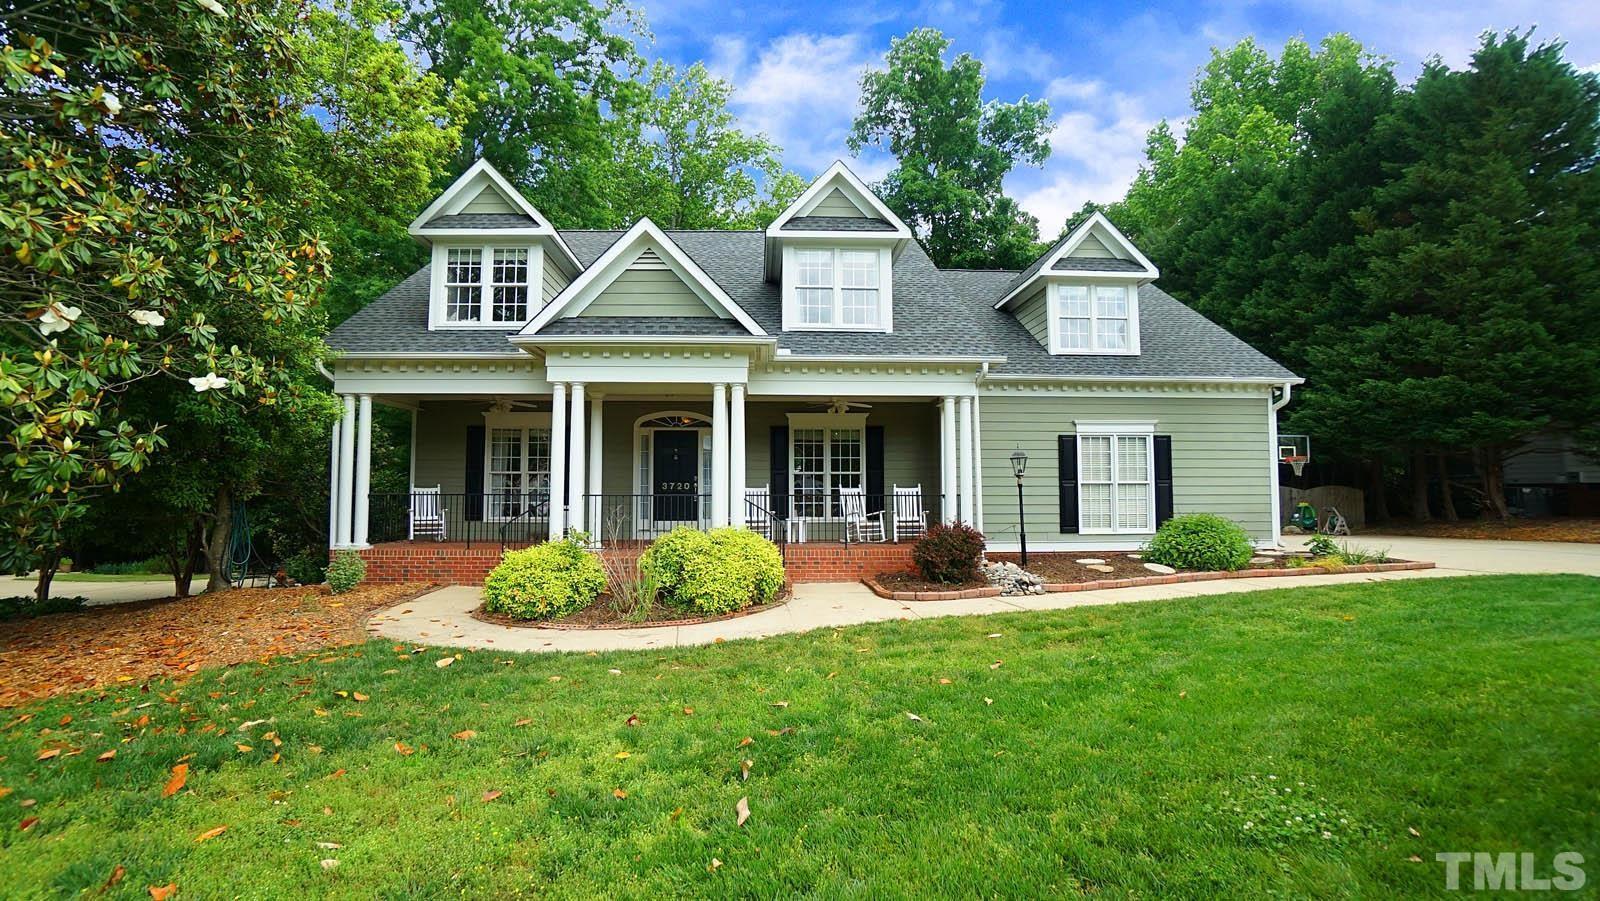 3720 Wesley Ridge Drive, 2509779, Apex, Detached,  sold, Realty World - Triangle Living